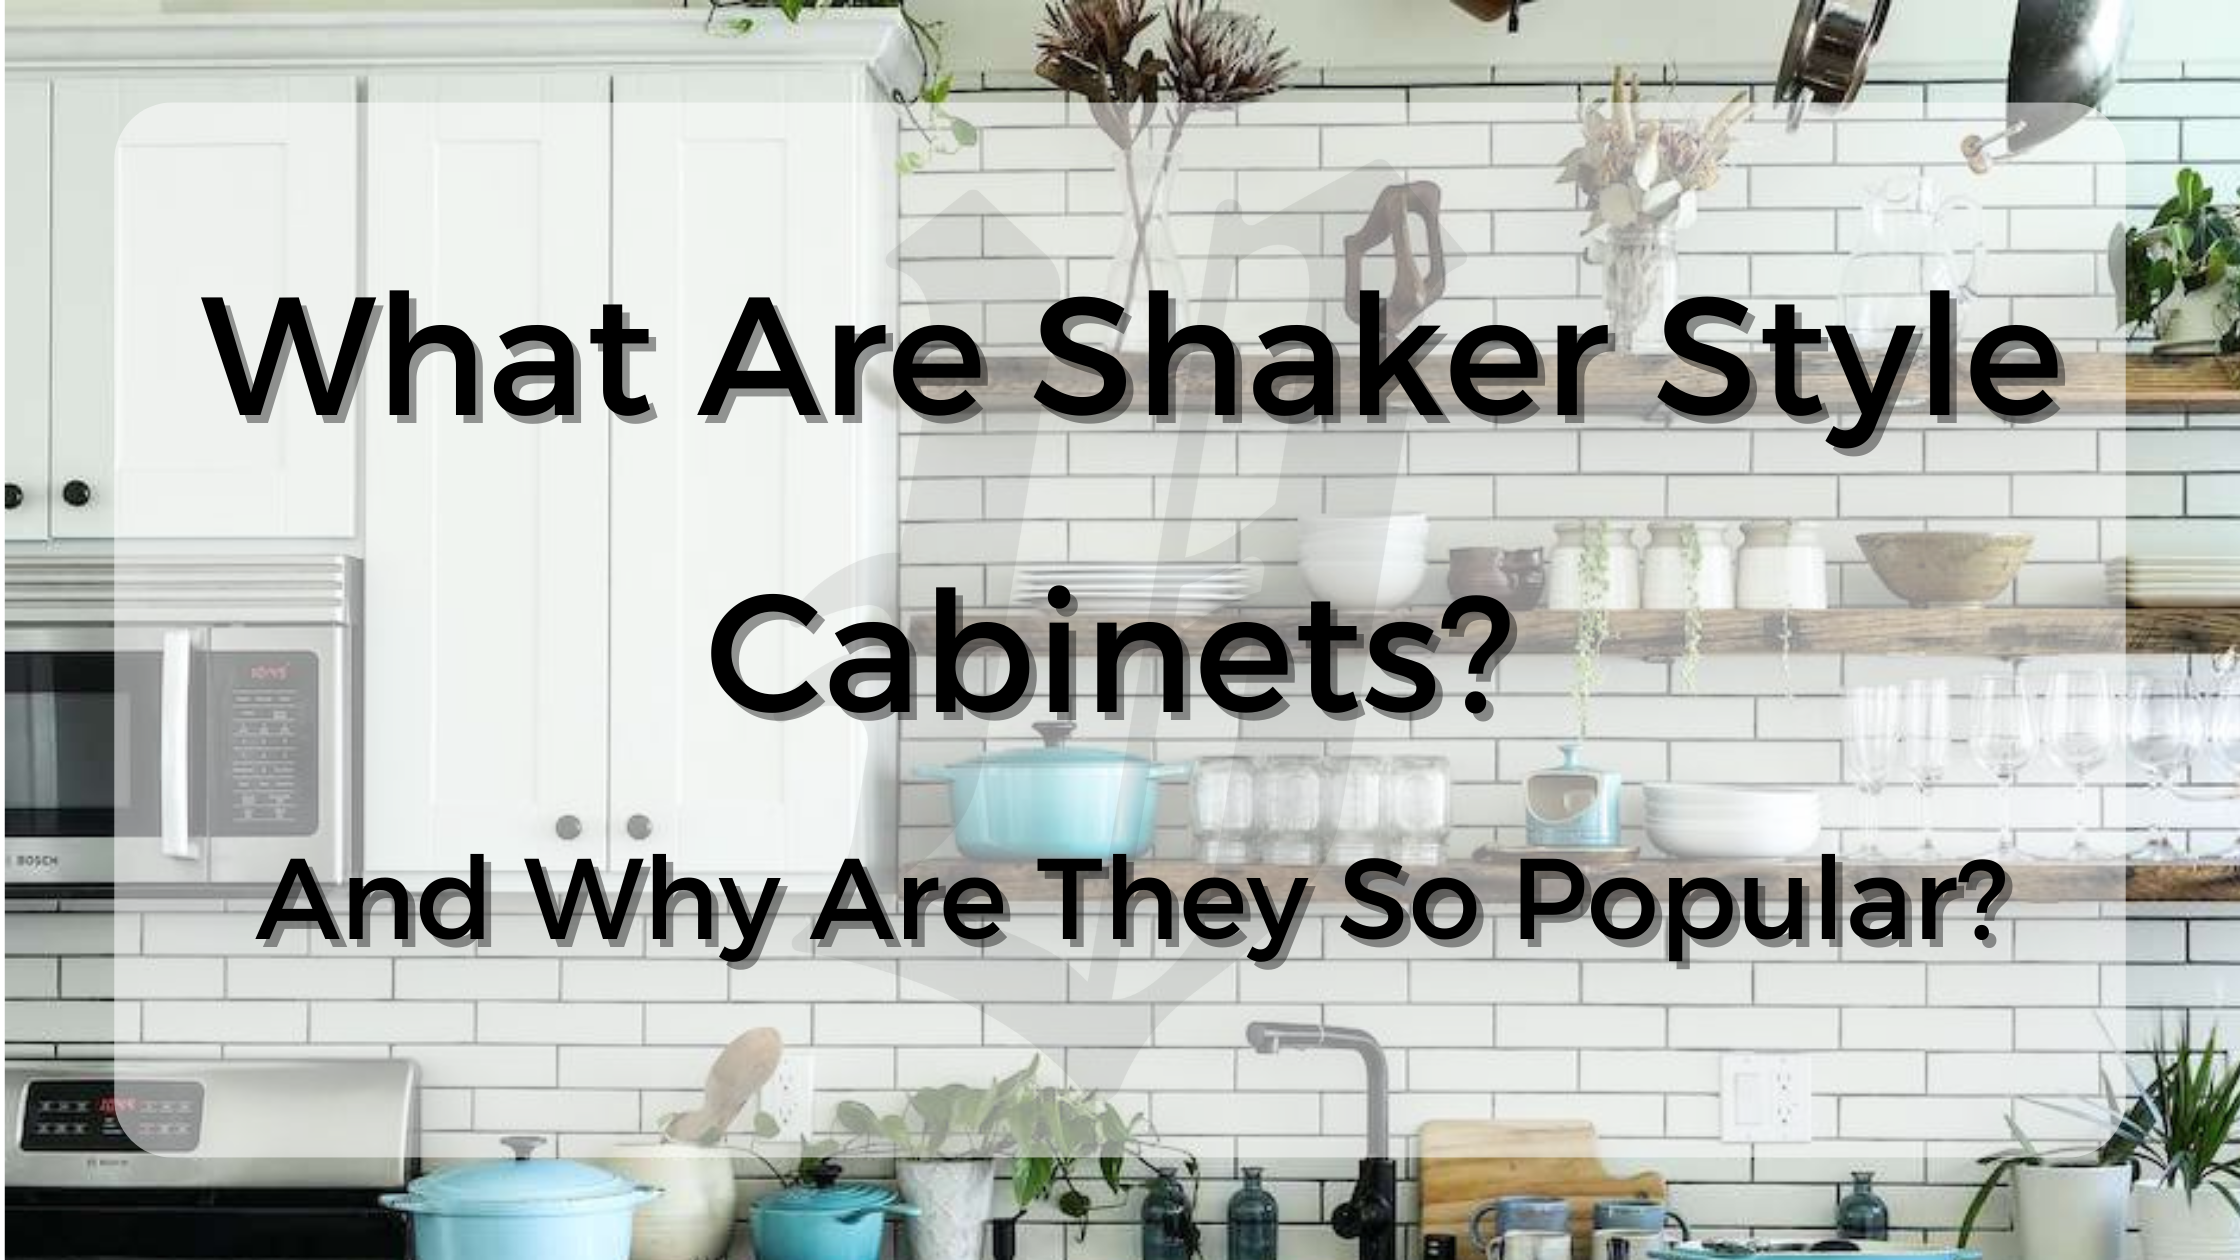 what are shaker style cabinets?